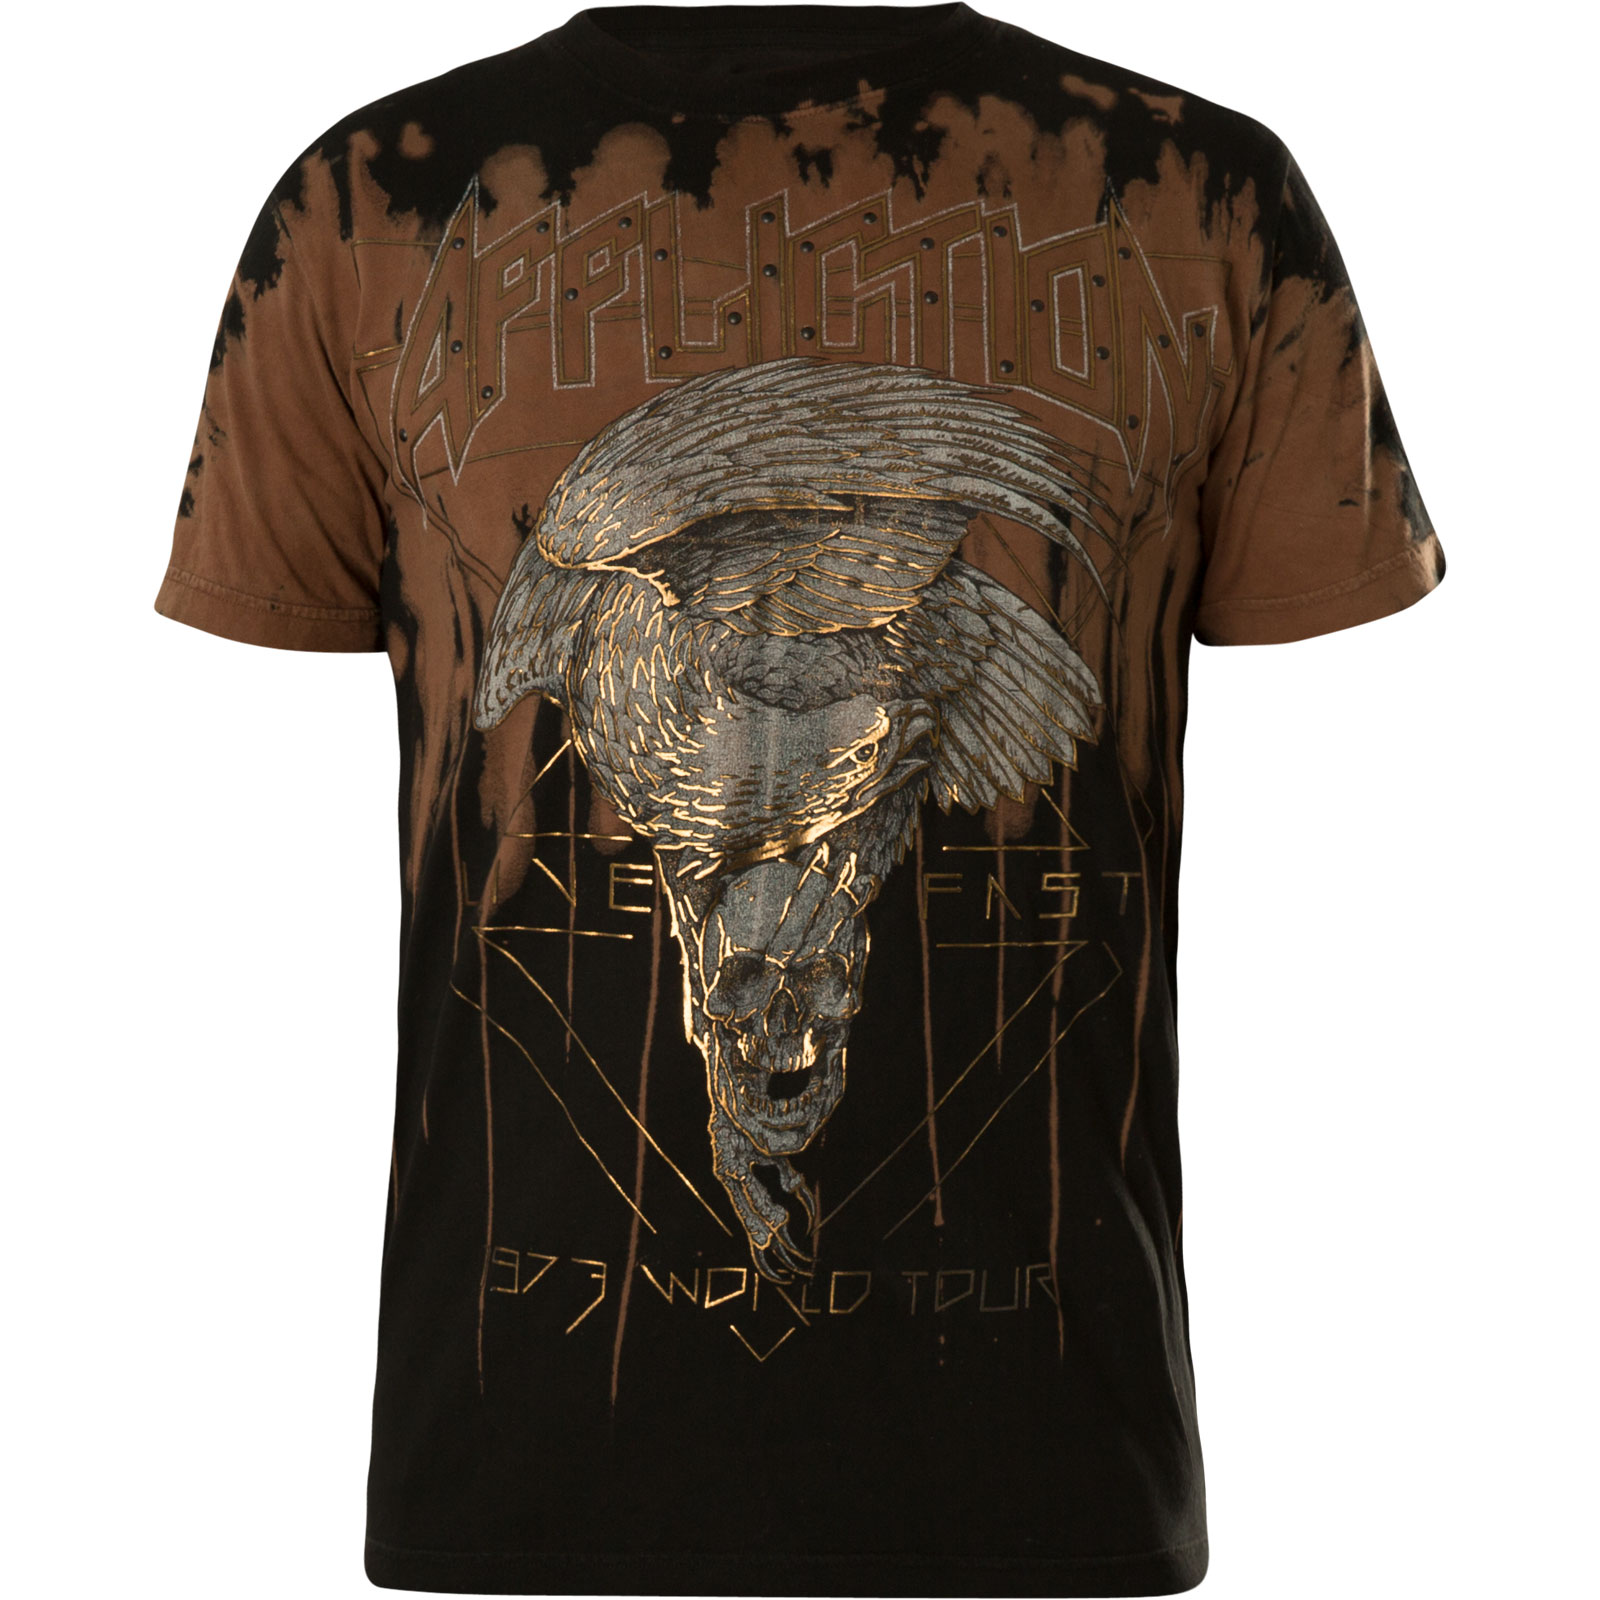 Affliction Eagle Rock T-Shirt Print featuring a bird of prey and skull